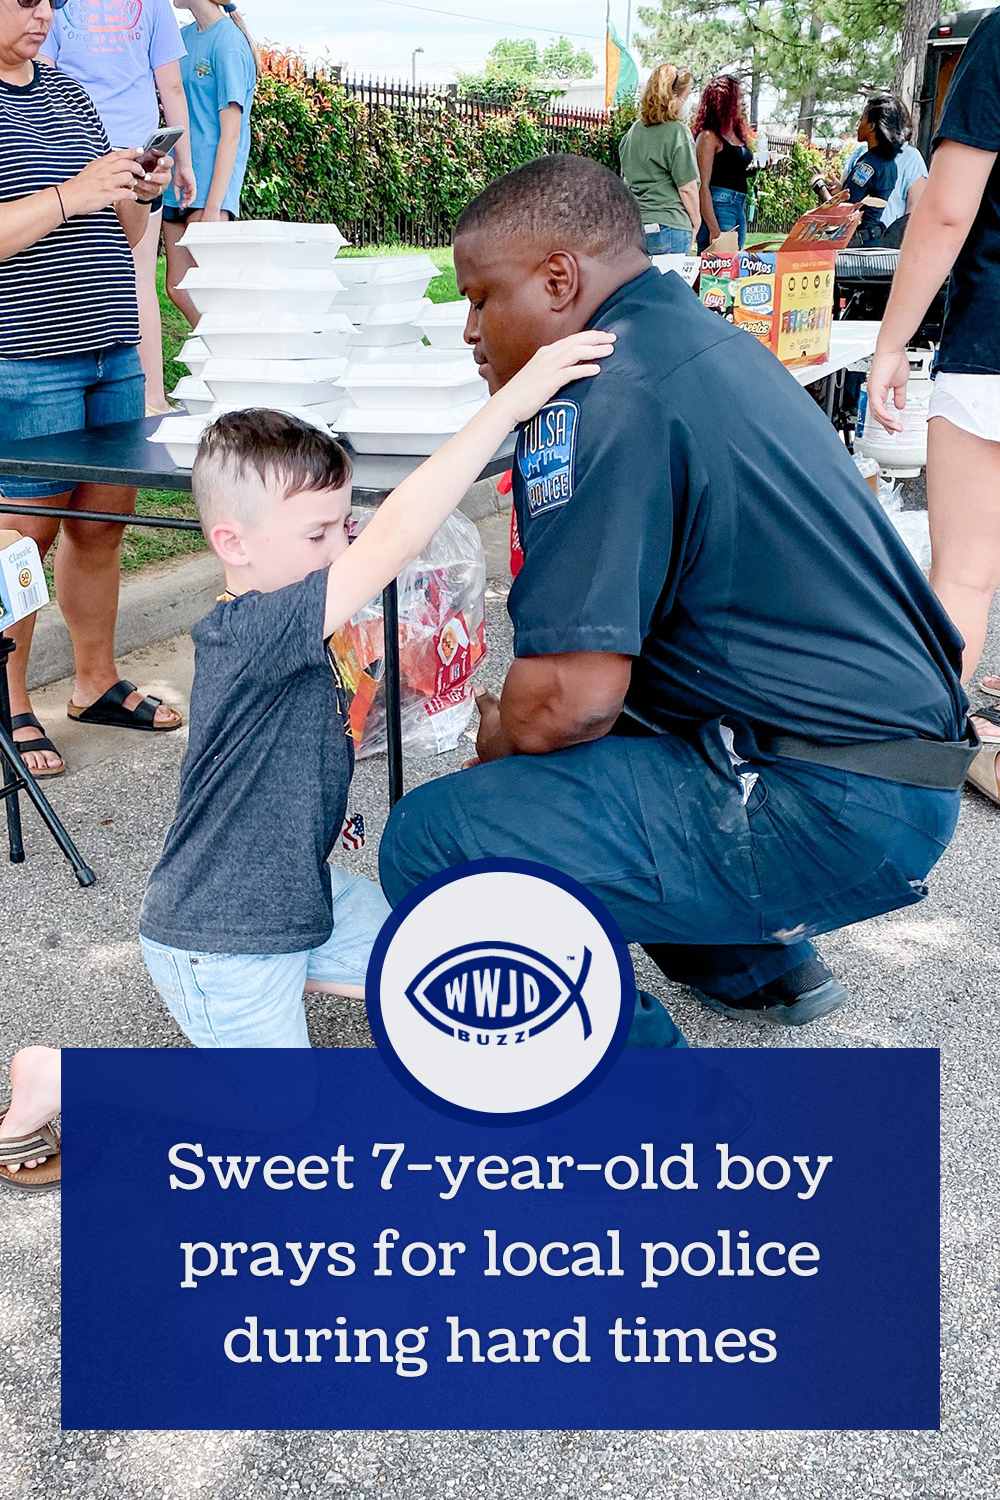 Sweet 7-year-old boy prays for local police during hard times